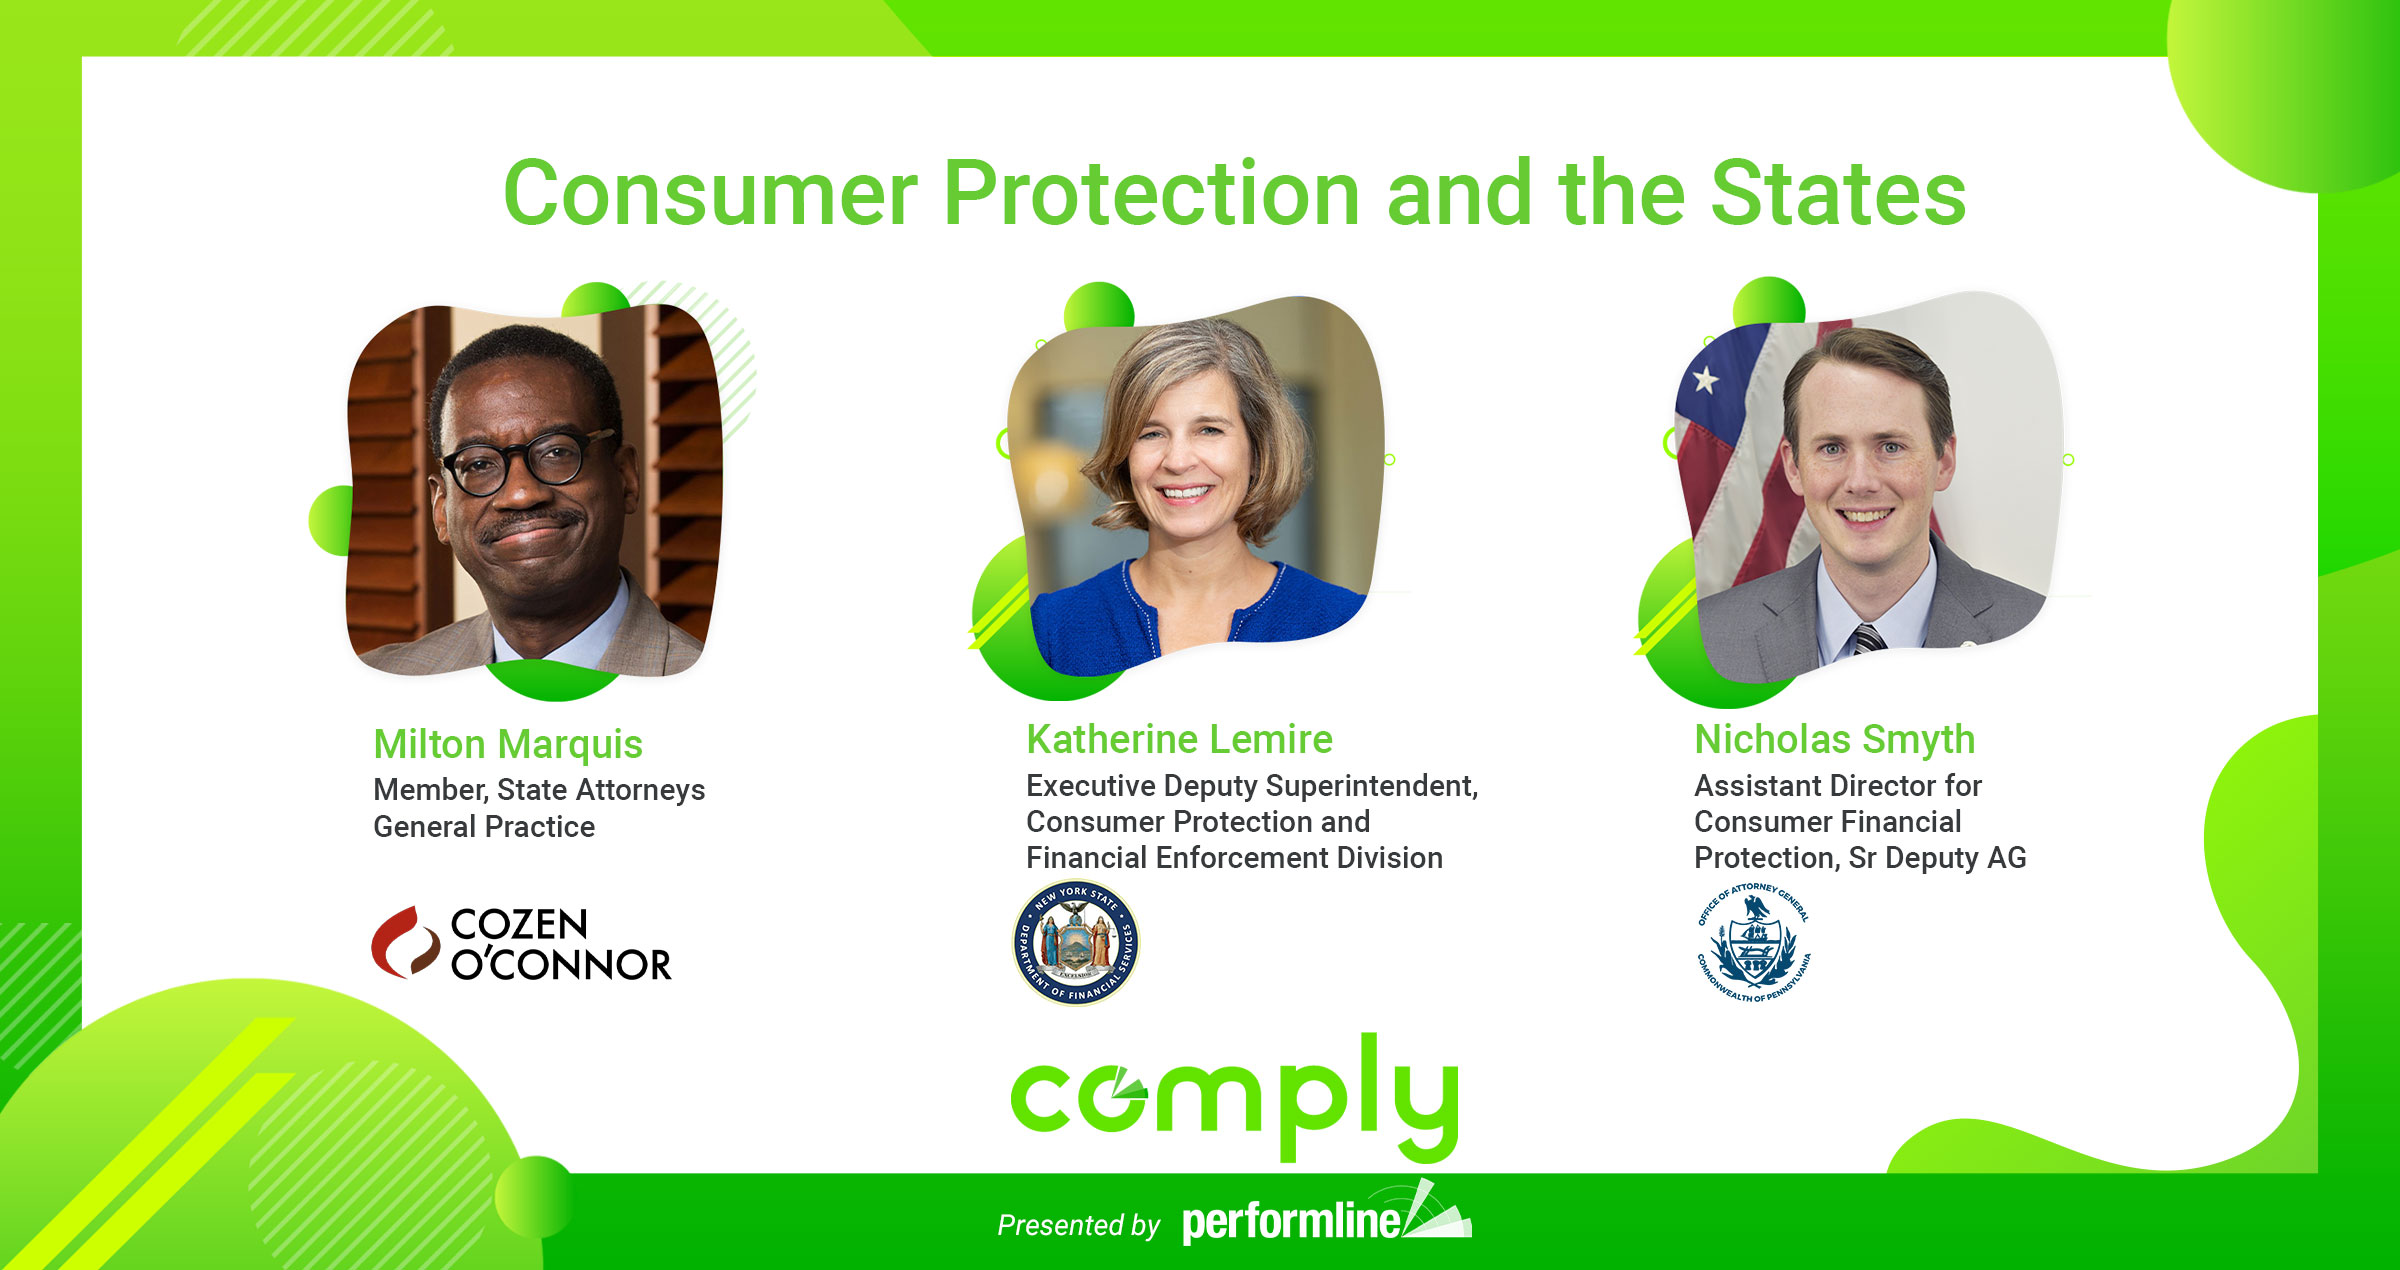 C21-LINKEDIN-Title-Slides-Consumer-Protection-and-the-States-1